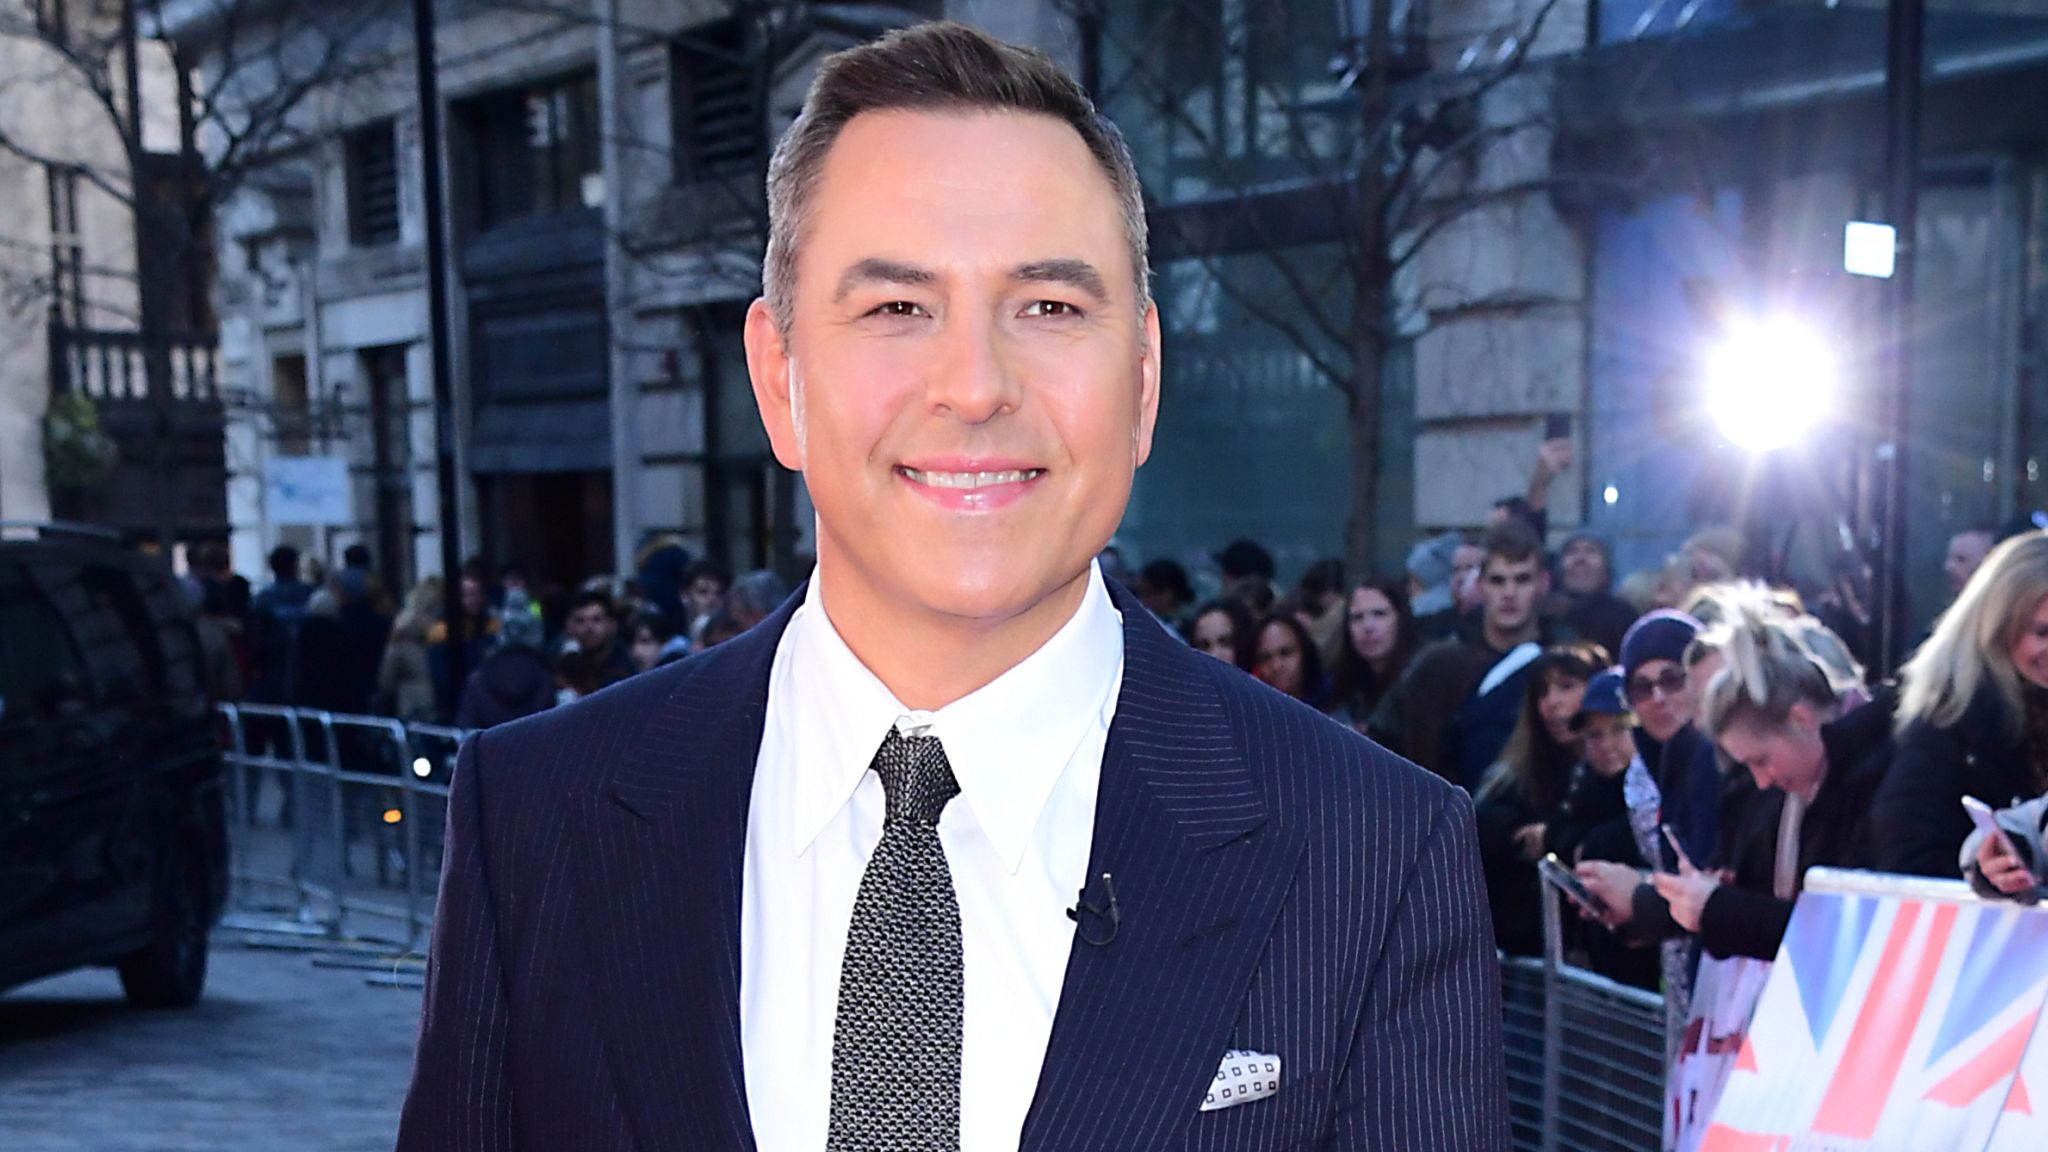 David Walliams made scathing remarks about Britain’s Got Talent contestants